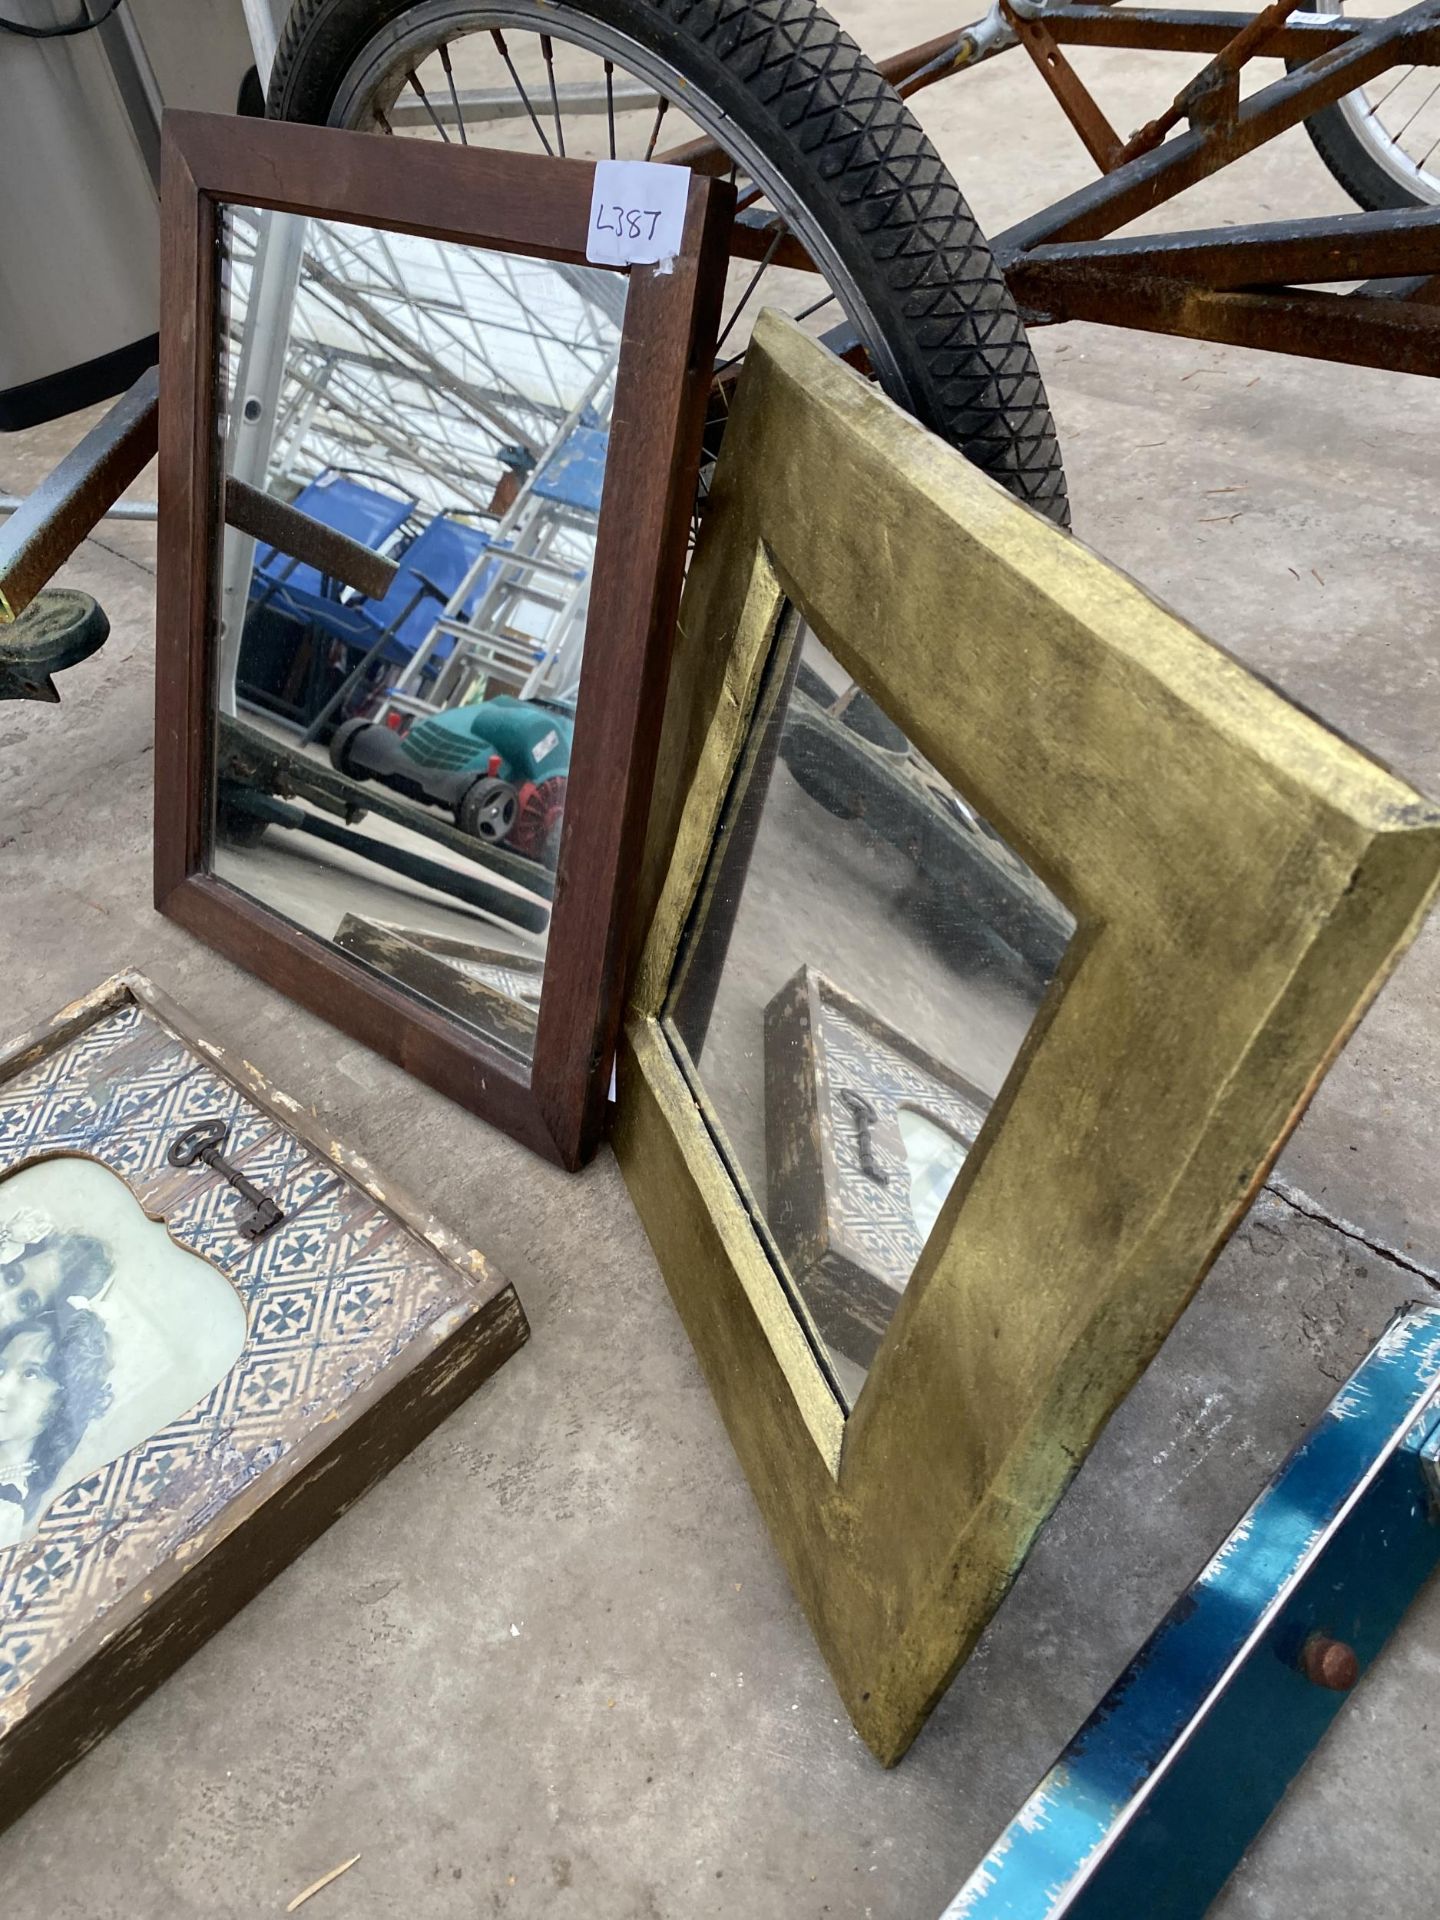 A VINTAGE WOODEN TRAY, TWO FRAMED MIRRORS AND A VINTAGE FRAMED PRINT - Image 2 of 5